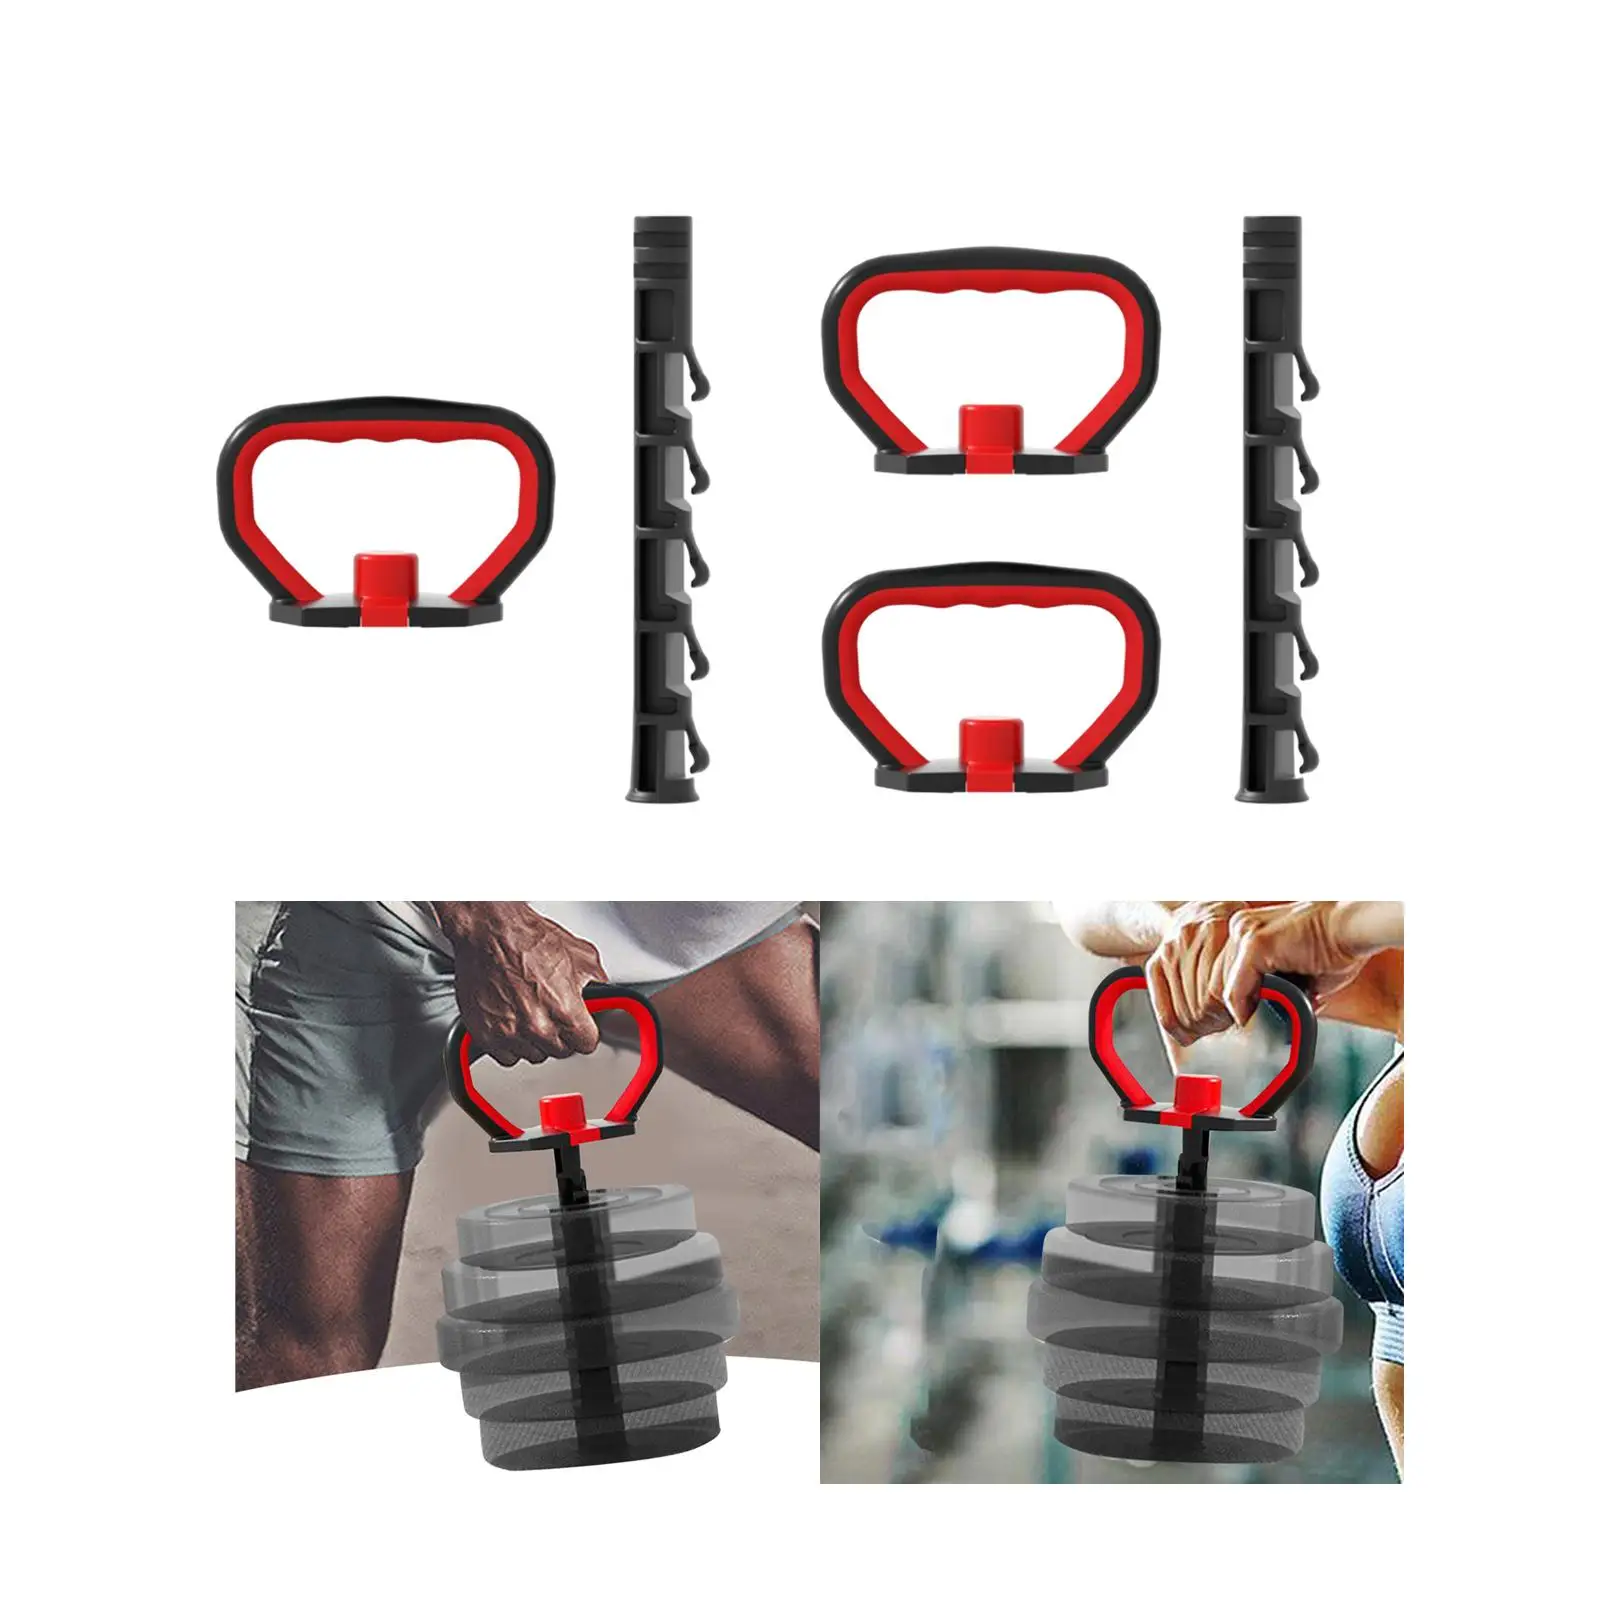 Kettle Bell Grip Handle Adjustable with Base Dumbbell Grip Kettlebell Push up Anti Slip Multifunctional for Plates Grip Handle